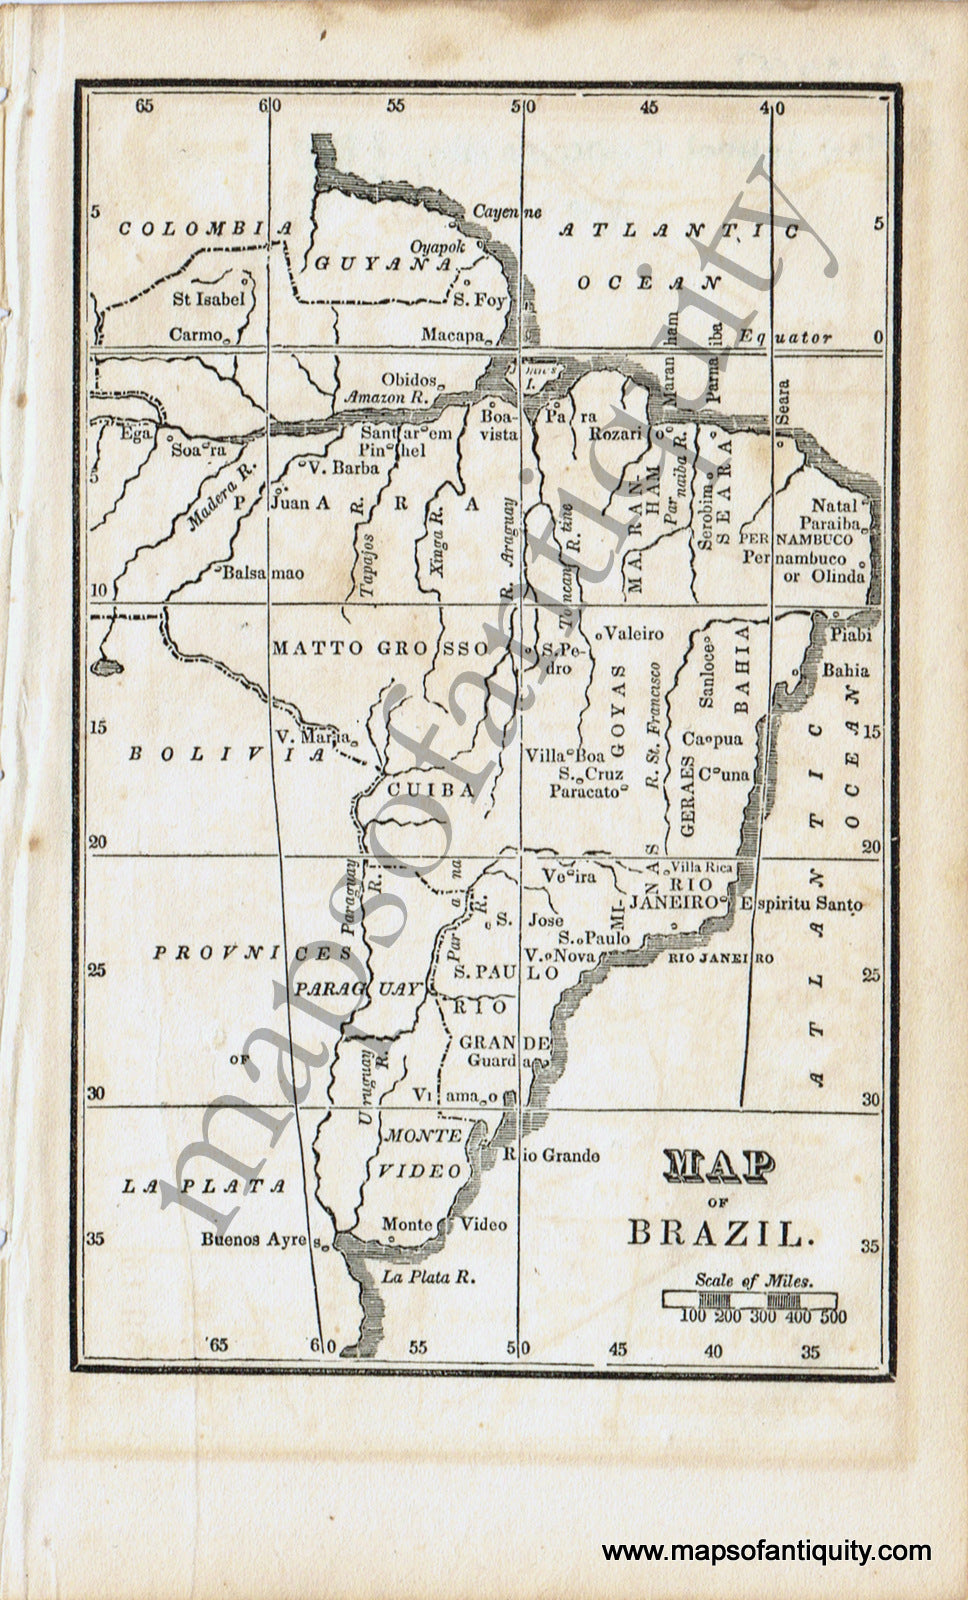 Antique-Black-and-White-Map-Map-of-Brazil-Caribbean-&-Latin-America-South-America-1830-Boston-School-Geography-Maps-Of-Antiquity